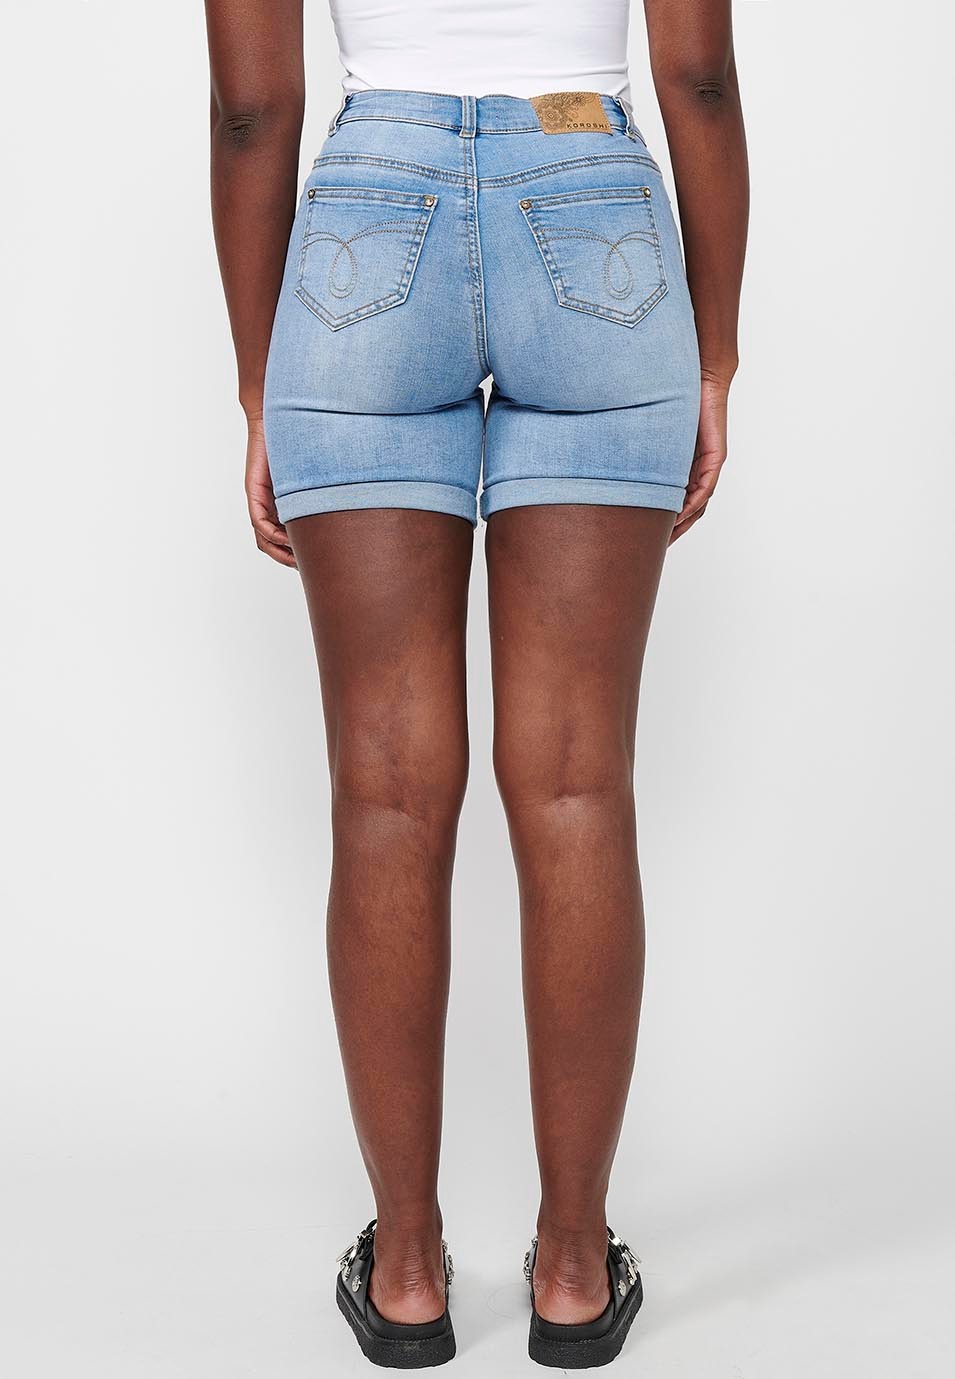 Shorts with cuffed finish with front zipper and button closure with embroidered details in Blue for Women 1